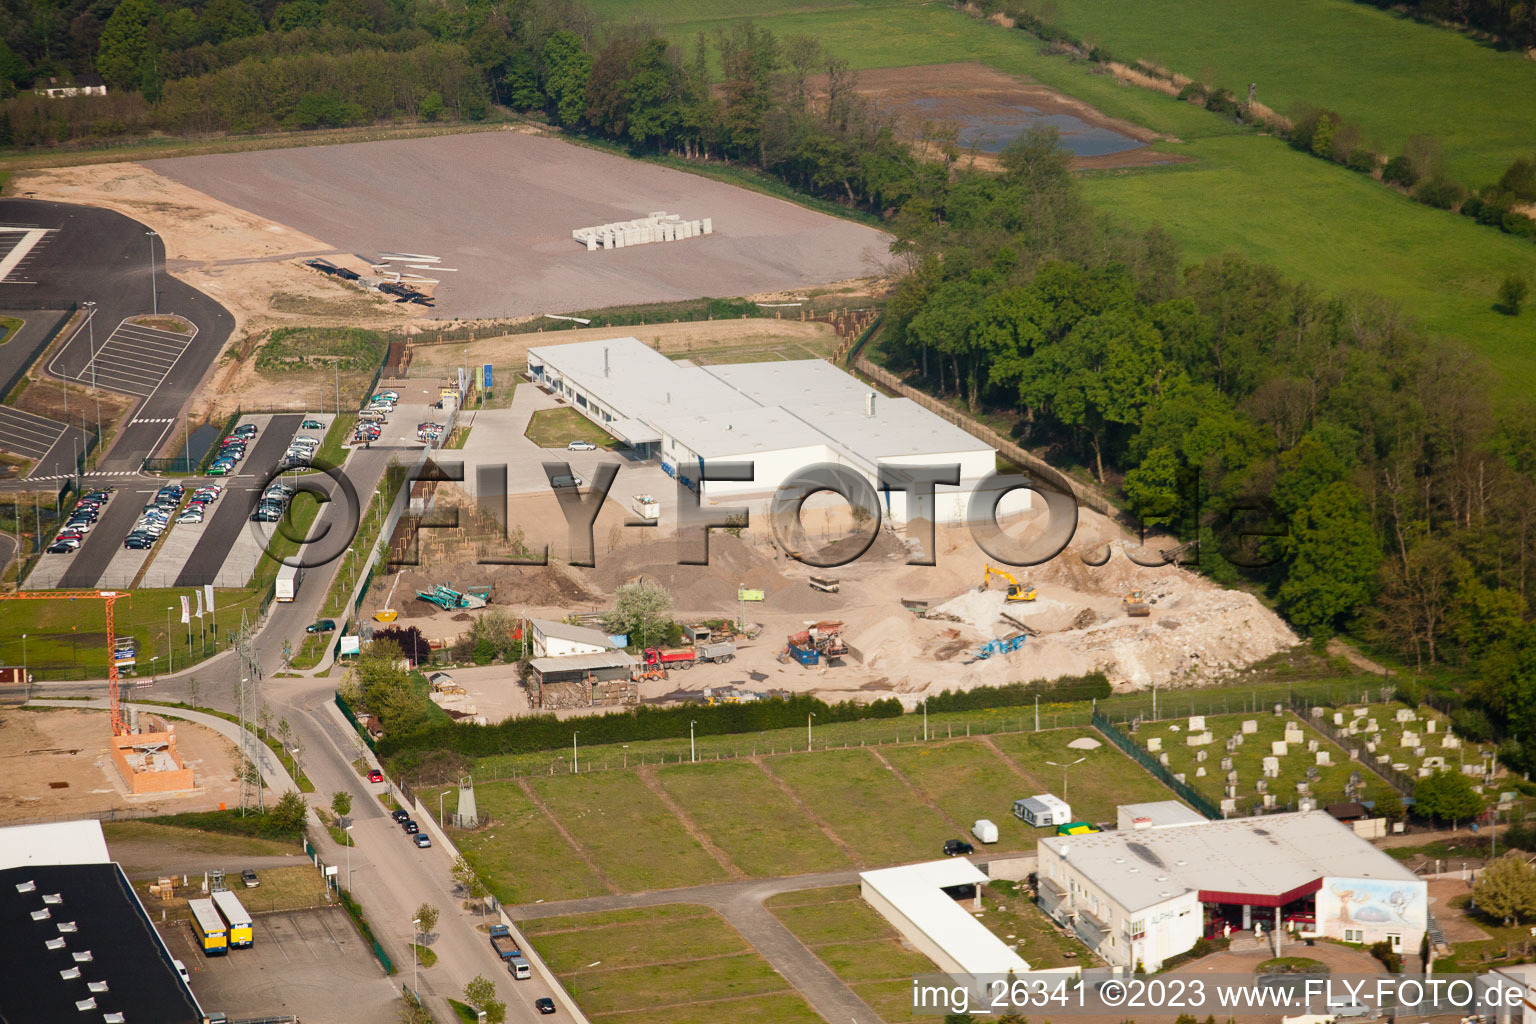 Horst industrial estate, Alfa Aesar in the district Minderslachen in Kandel in the state Rhineland-Palatinate, Germany seen from a drone